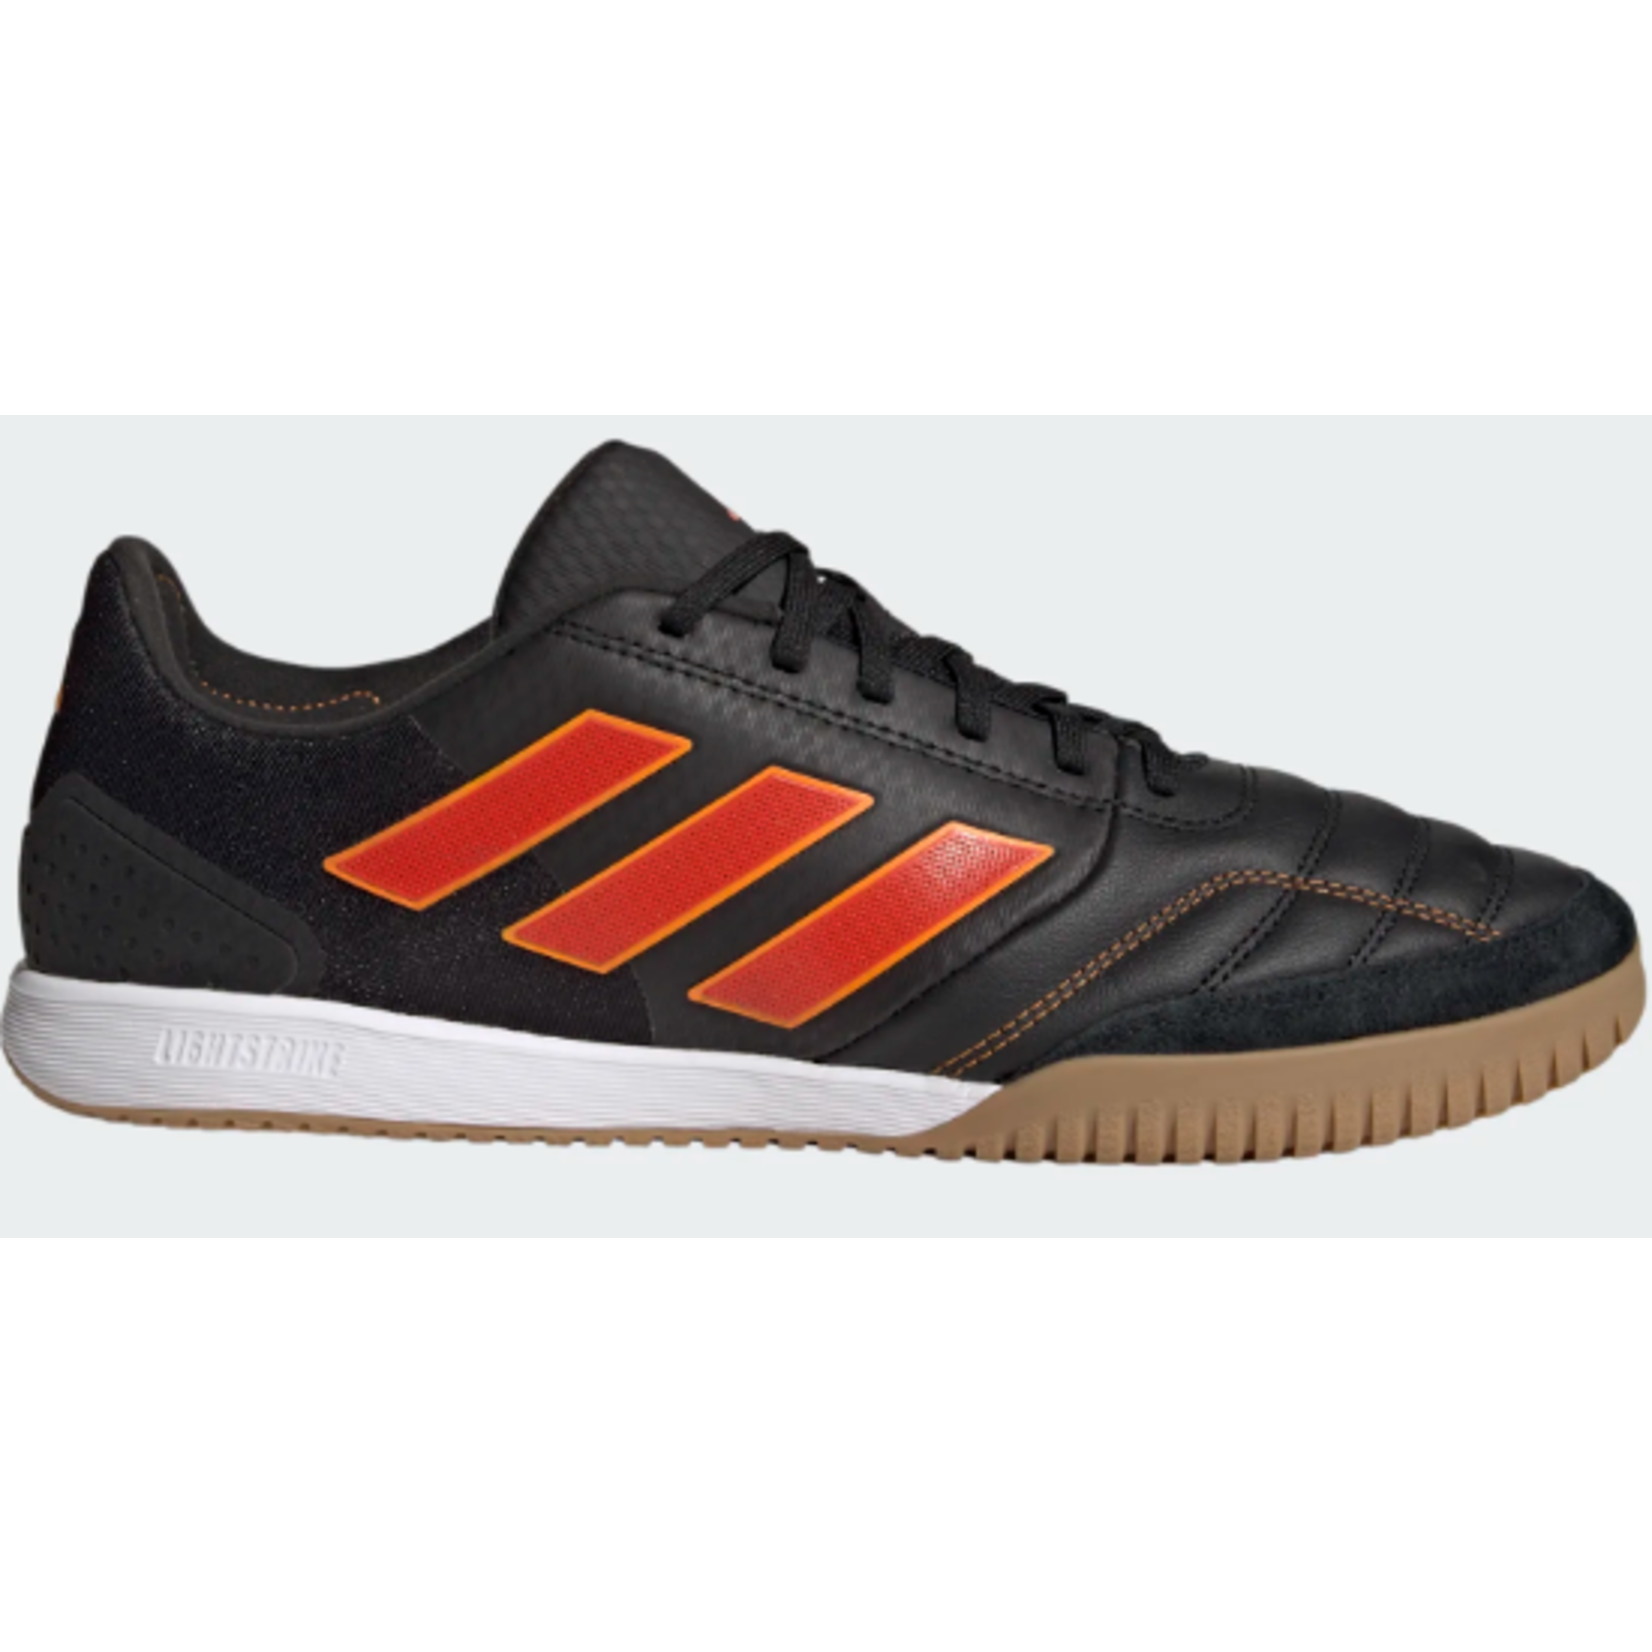 Adidas TOP SALA COMPETITION - IE1546